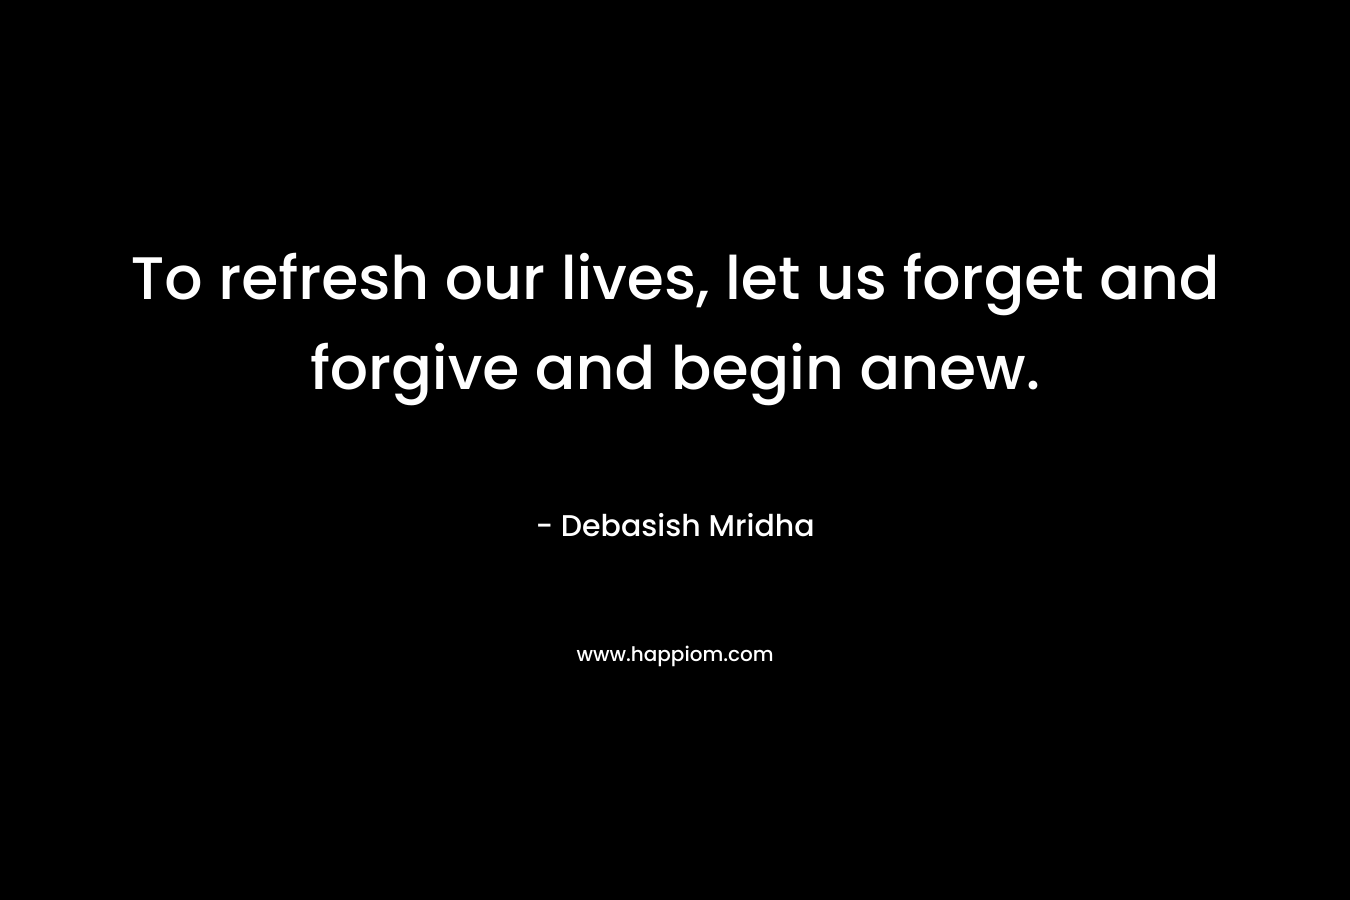 To refresh our lives, let us forget and forgive and begin anew. – Debasish Mridha